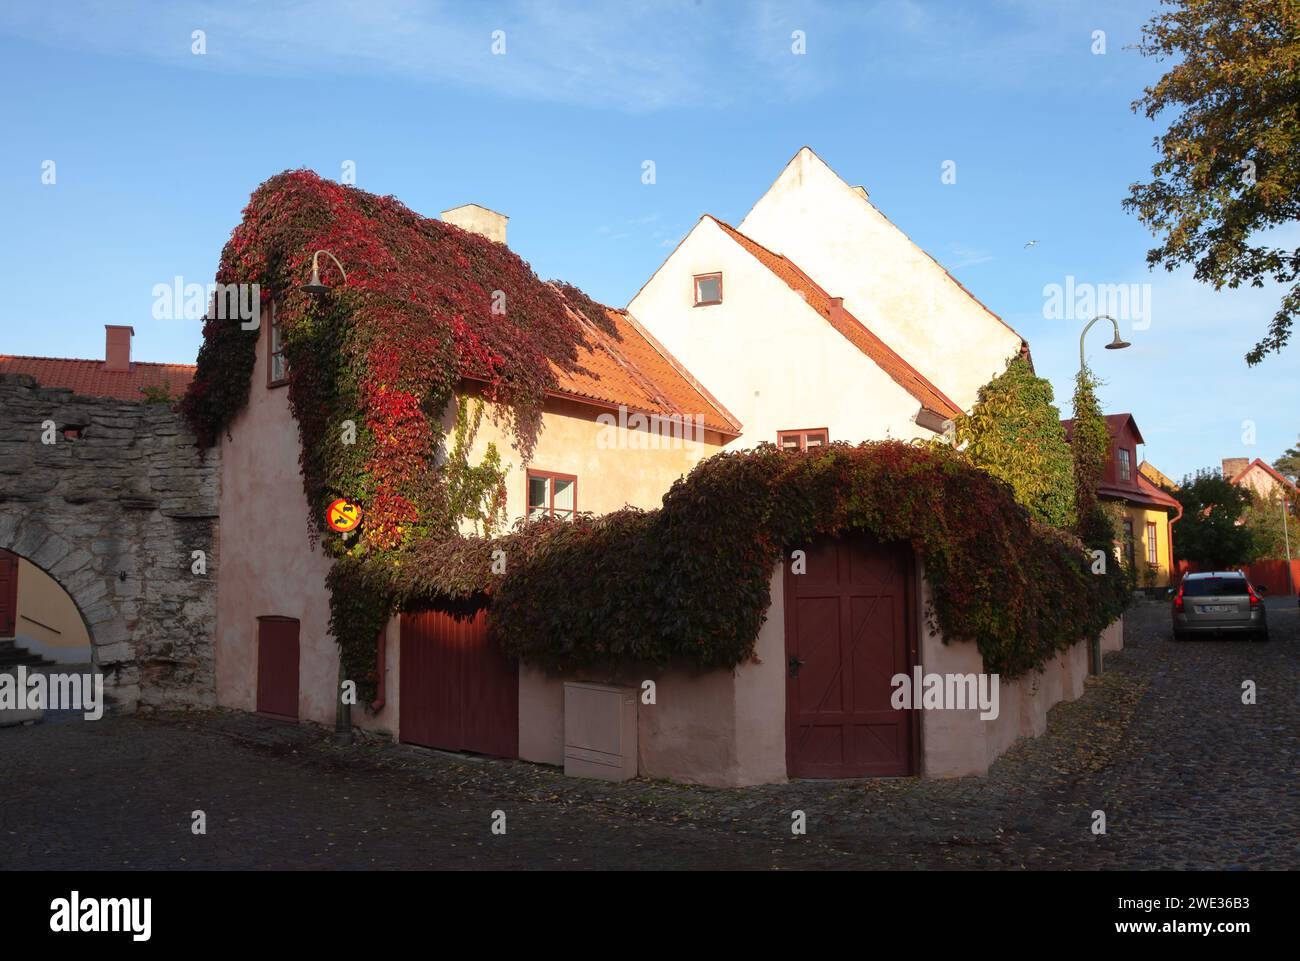 VISBY, SWEDEN ON OCTOBER 11, 2019. Street view of old buildings. House, homes, and stores in the City. Editorial use. Stock Photo